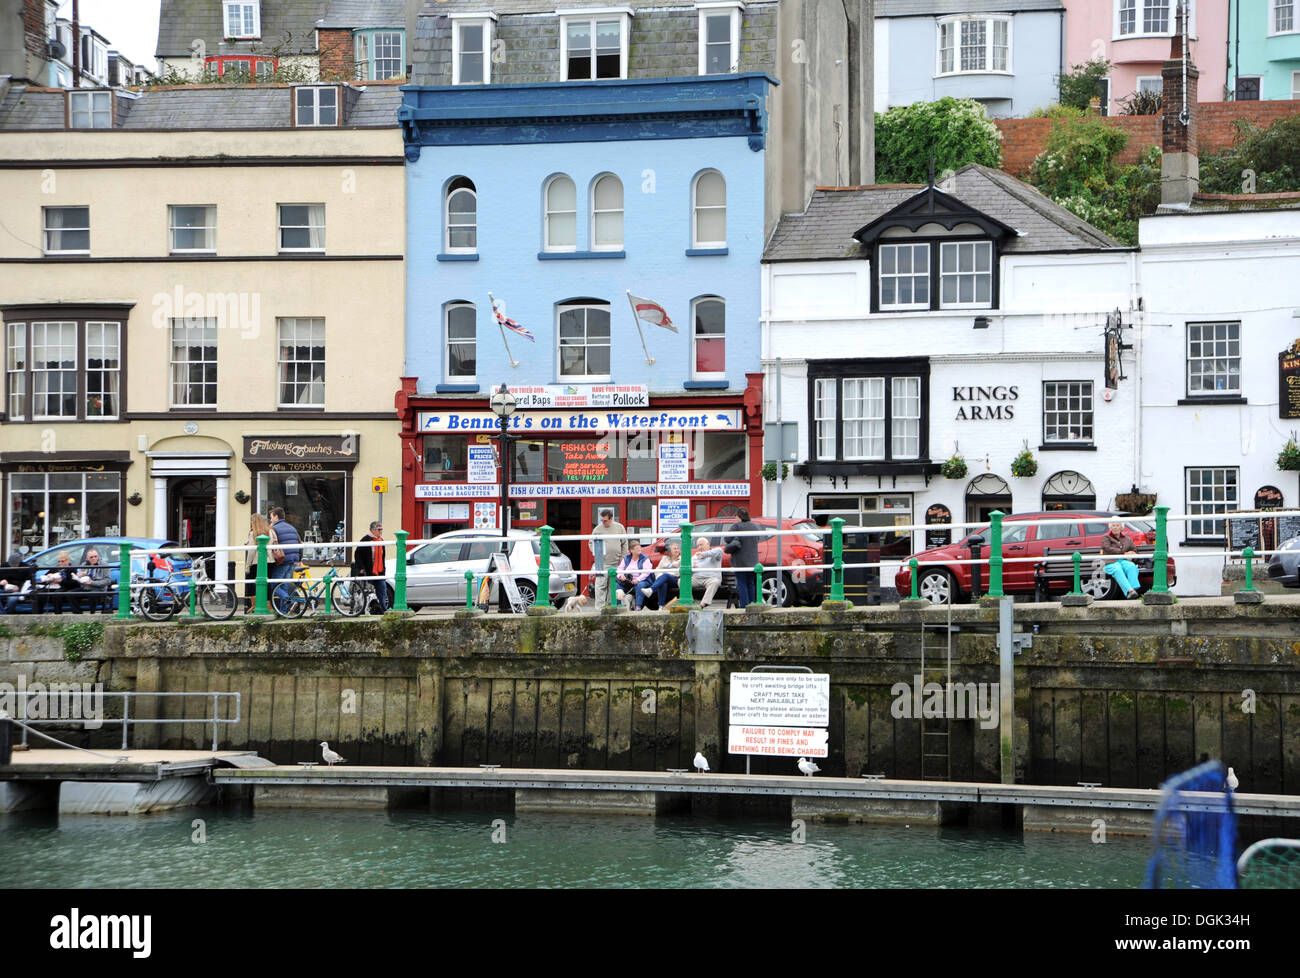 Famous fish and chip shop Bennett's on the Waterfront Weymouth Dorset Wessex UK Stock Photo